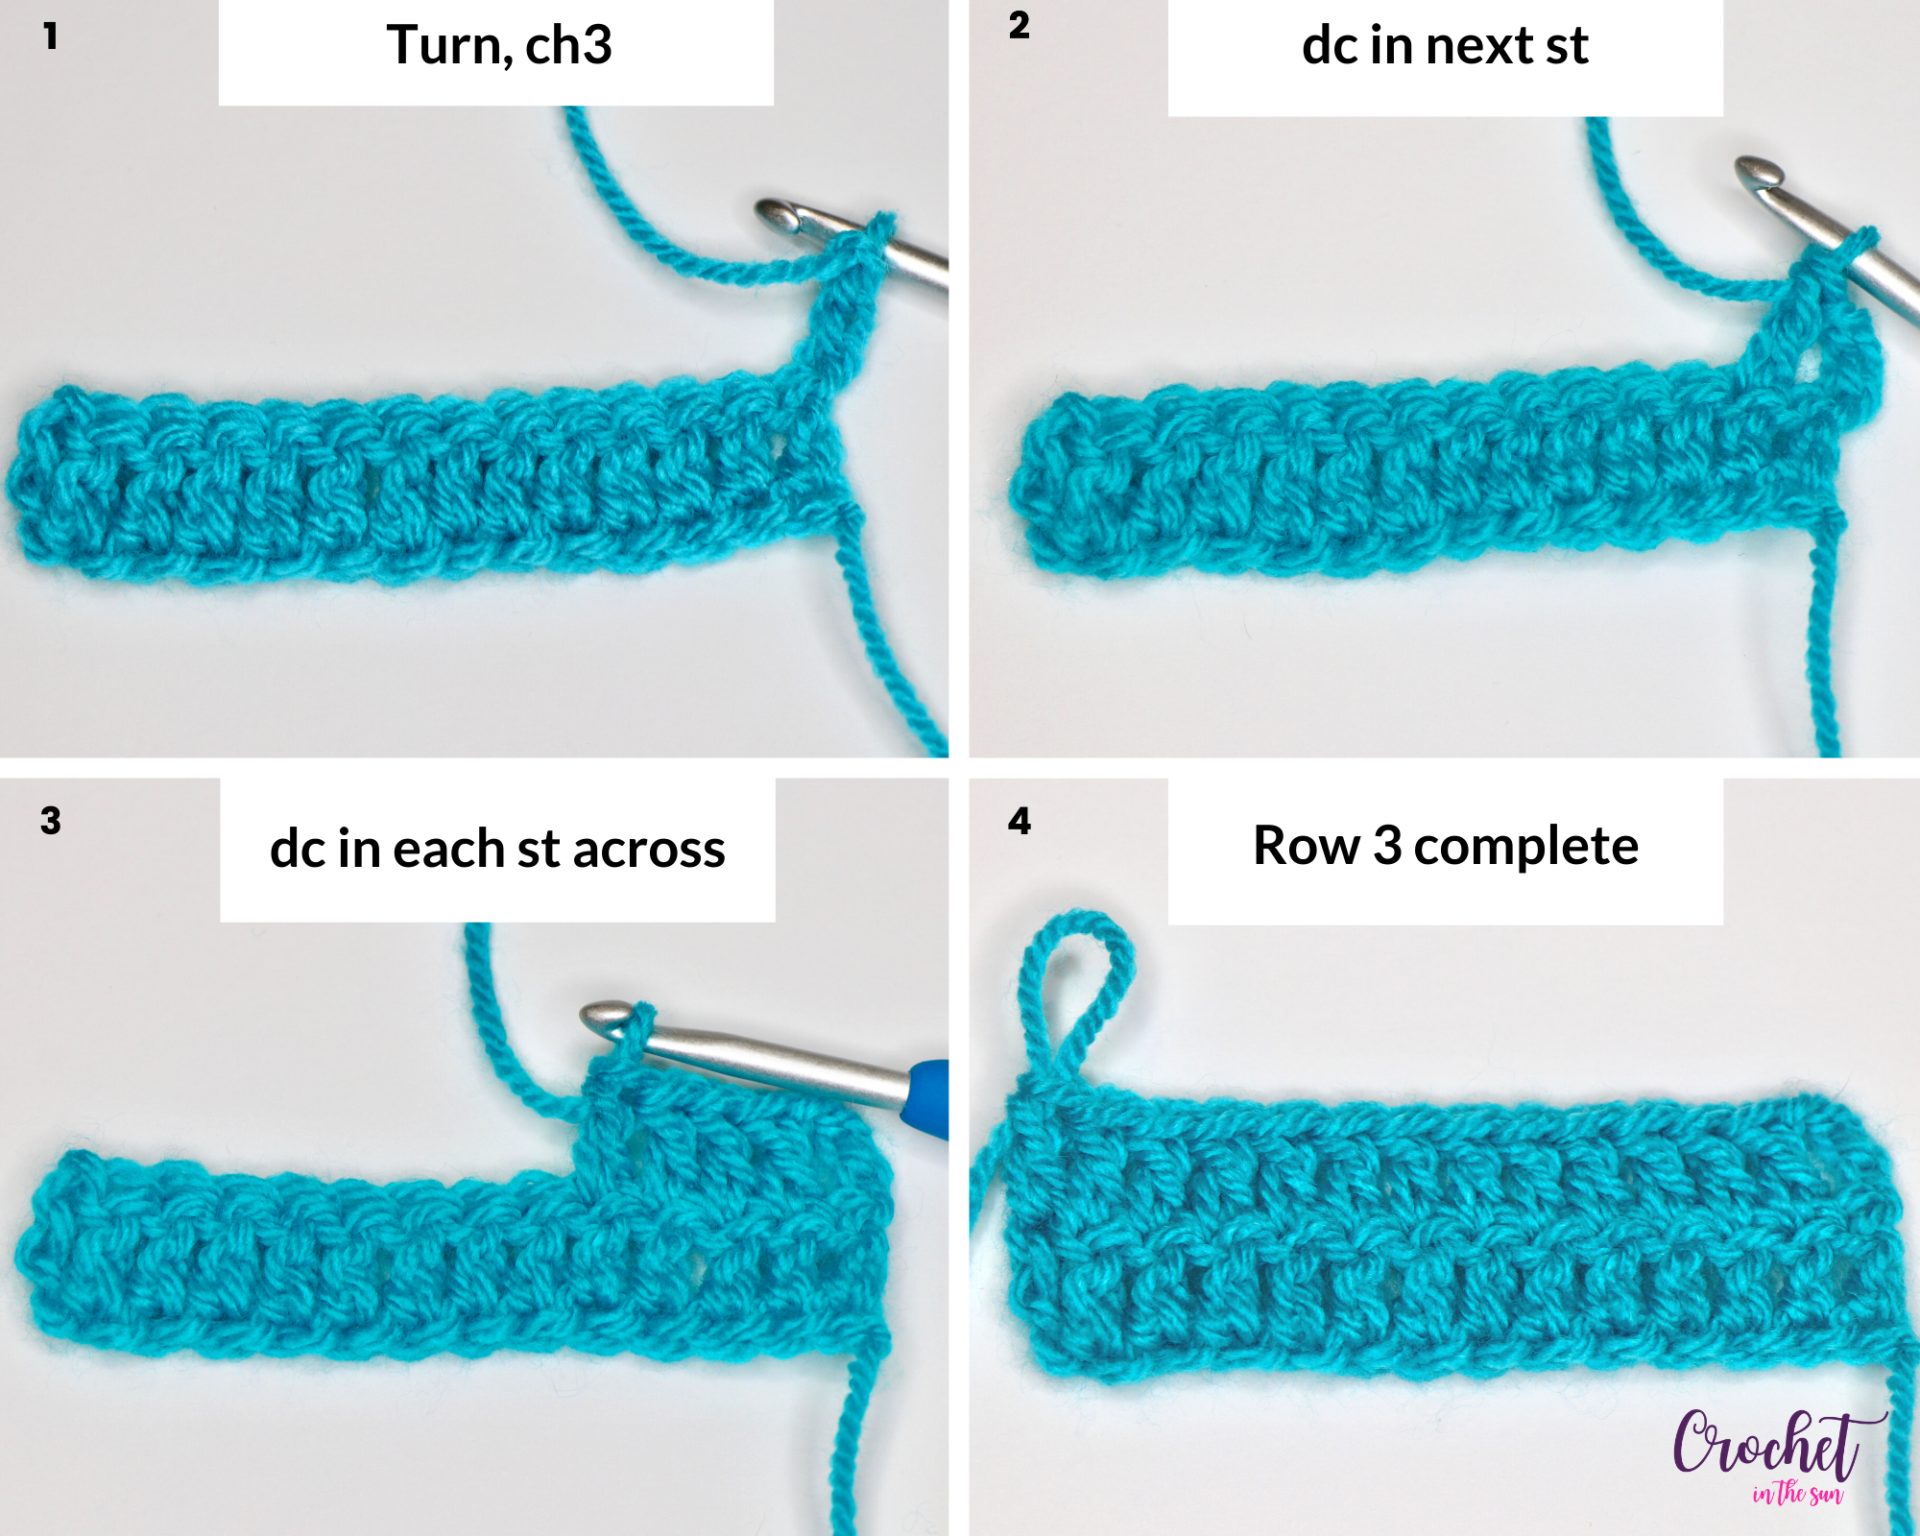 Free and easy crochet project. This features my 'Open Windows' stitch which is an easy stitch repeat, and works up to be so beautiful! This is the progress after Row 3. Beginner friendly and FREE crochet pattern!